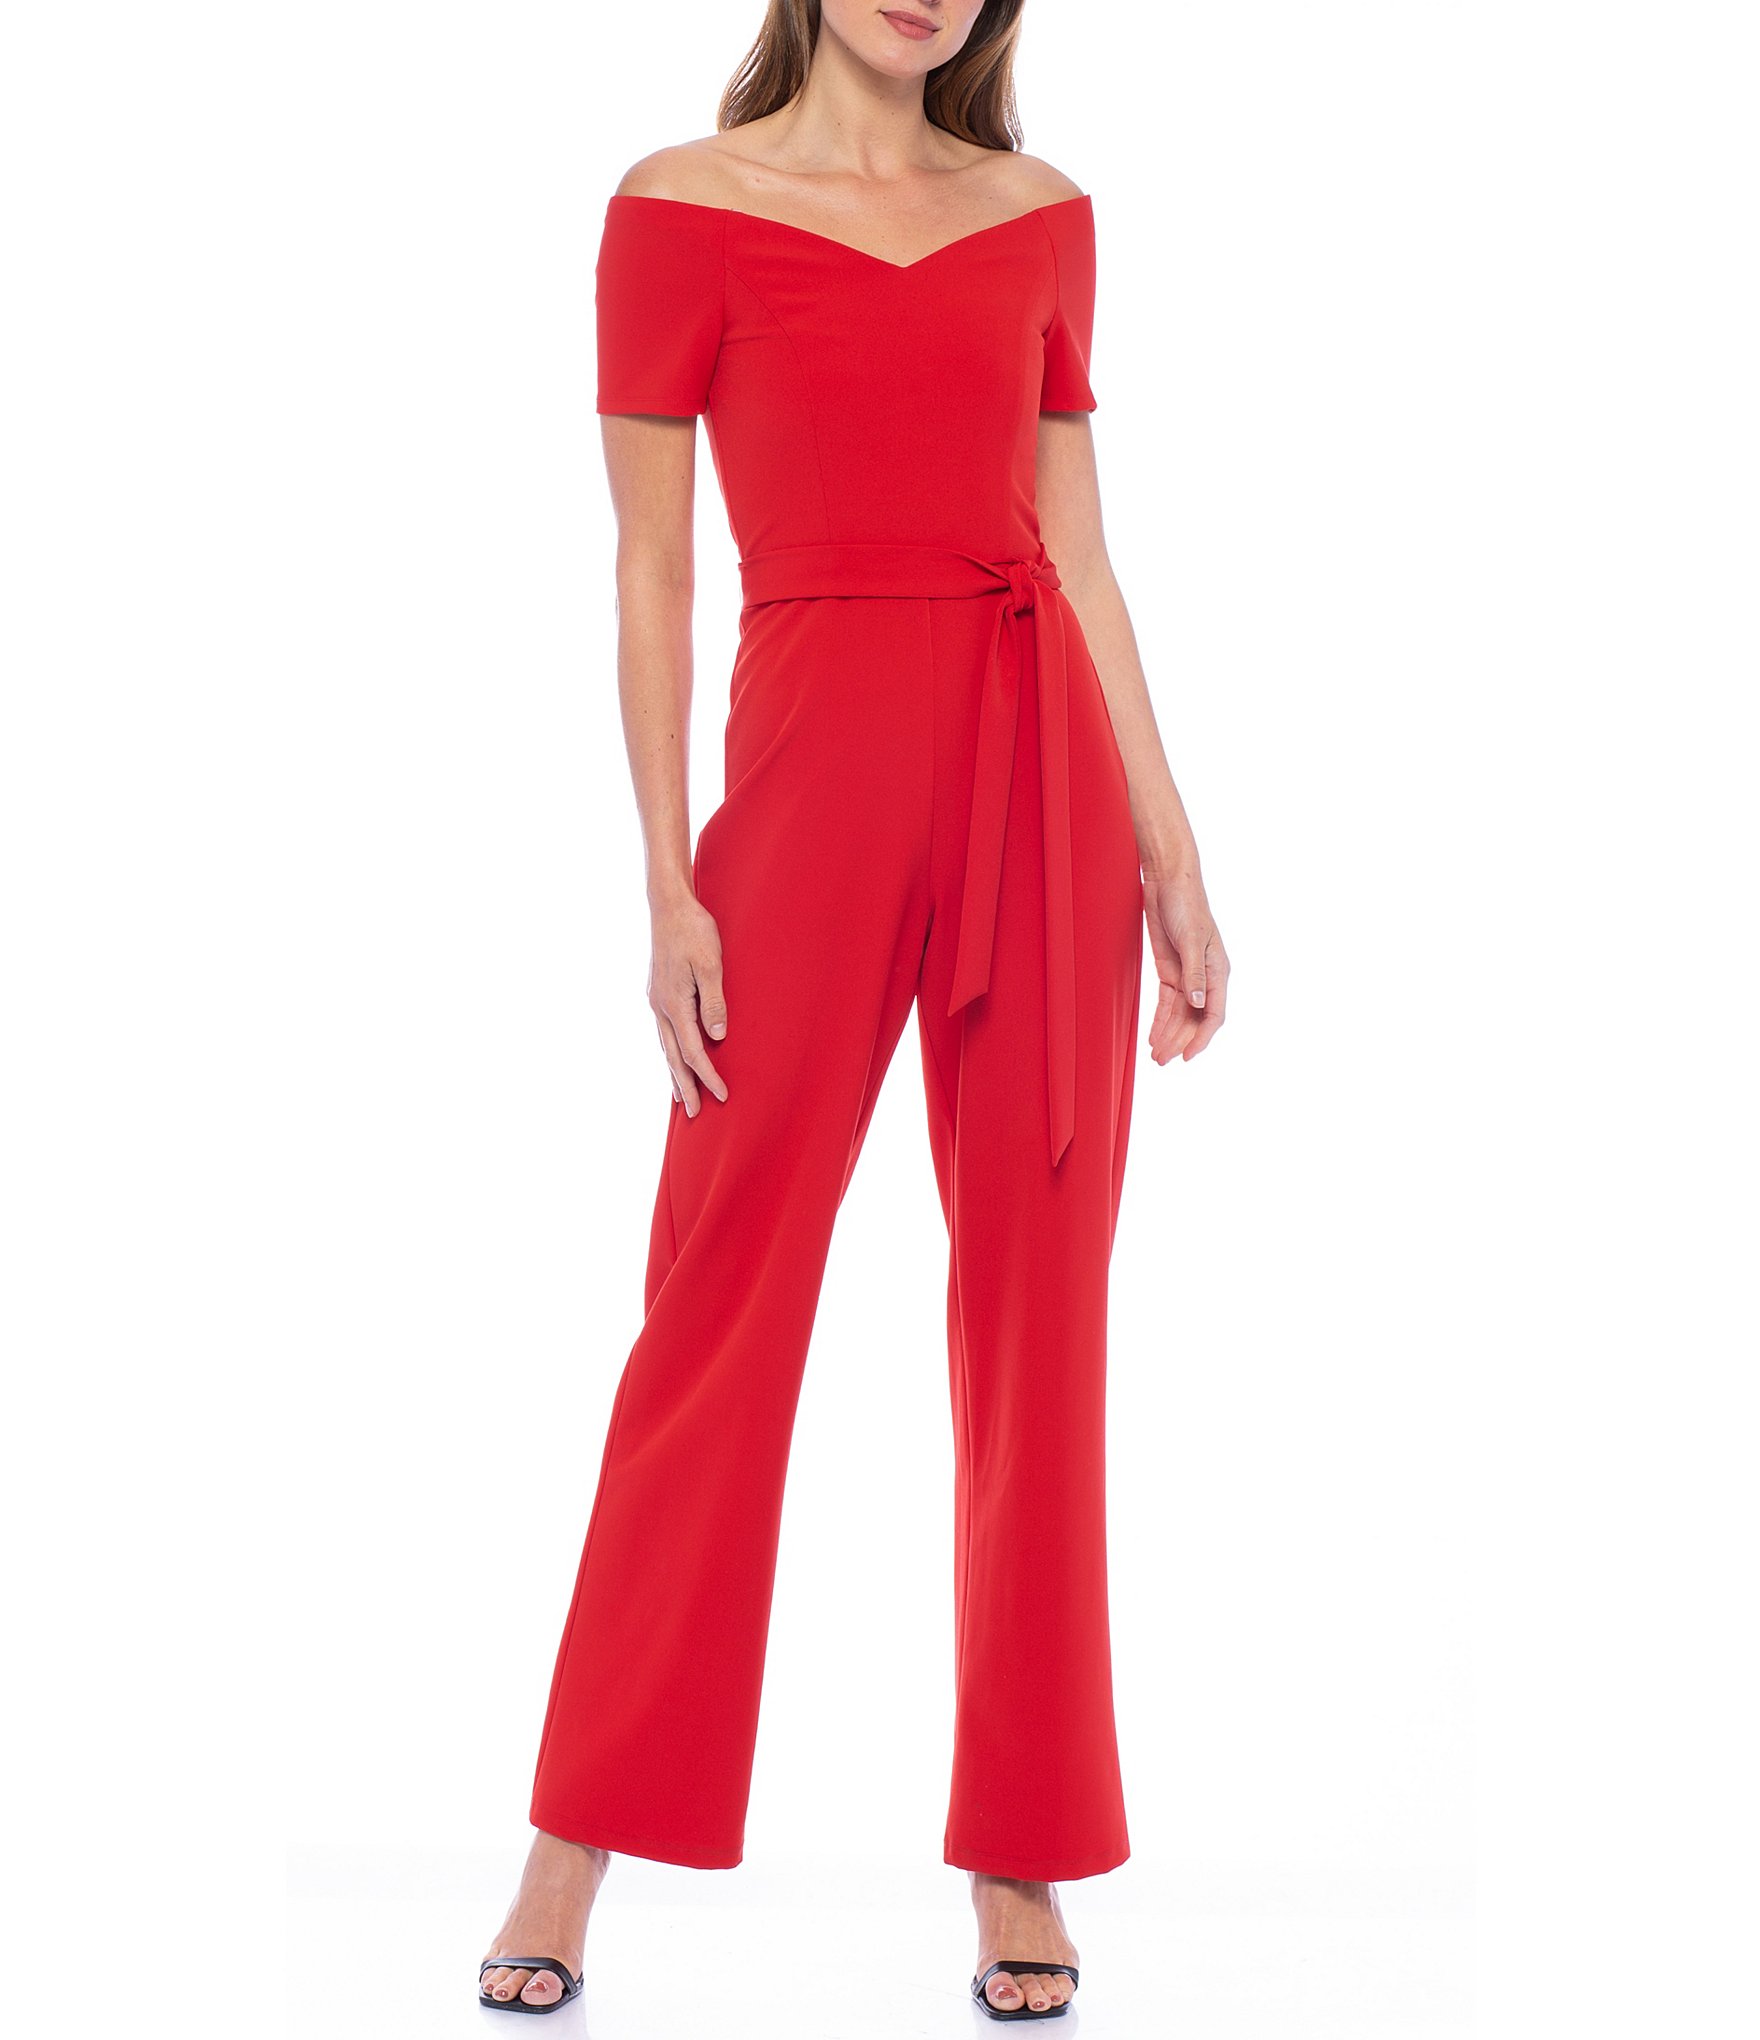 Red Women's Jumpsuits & Rompers